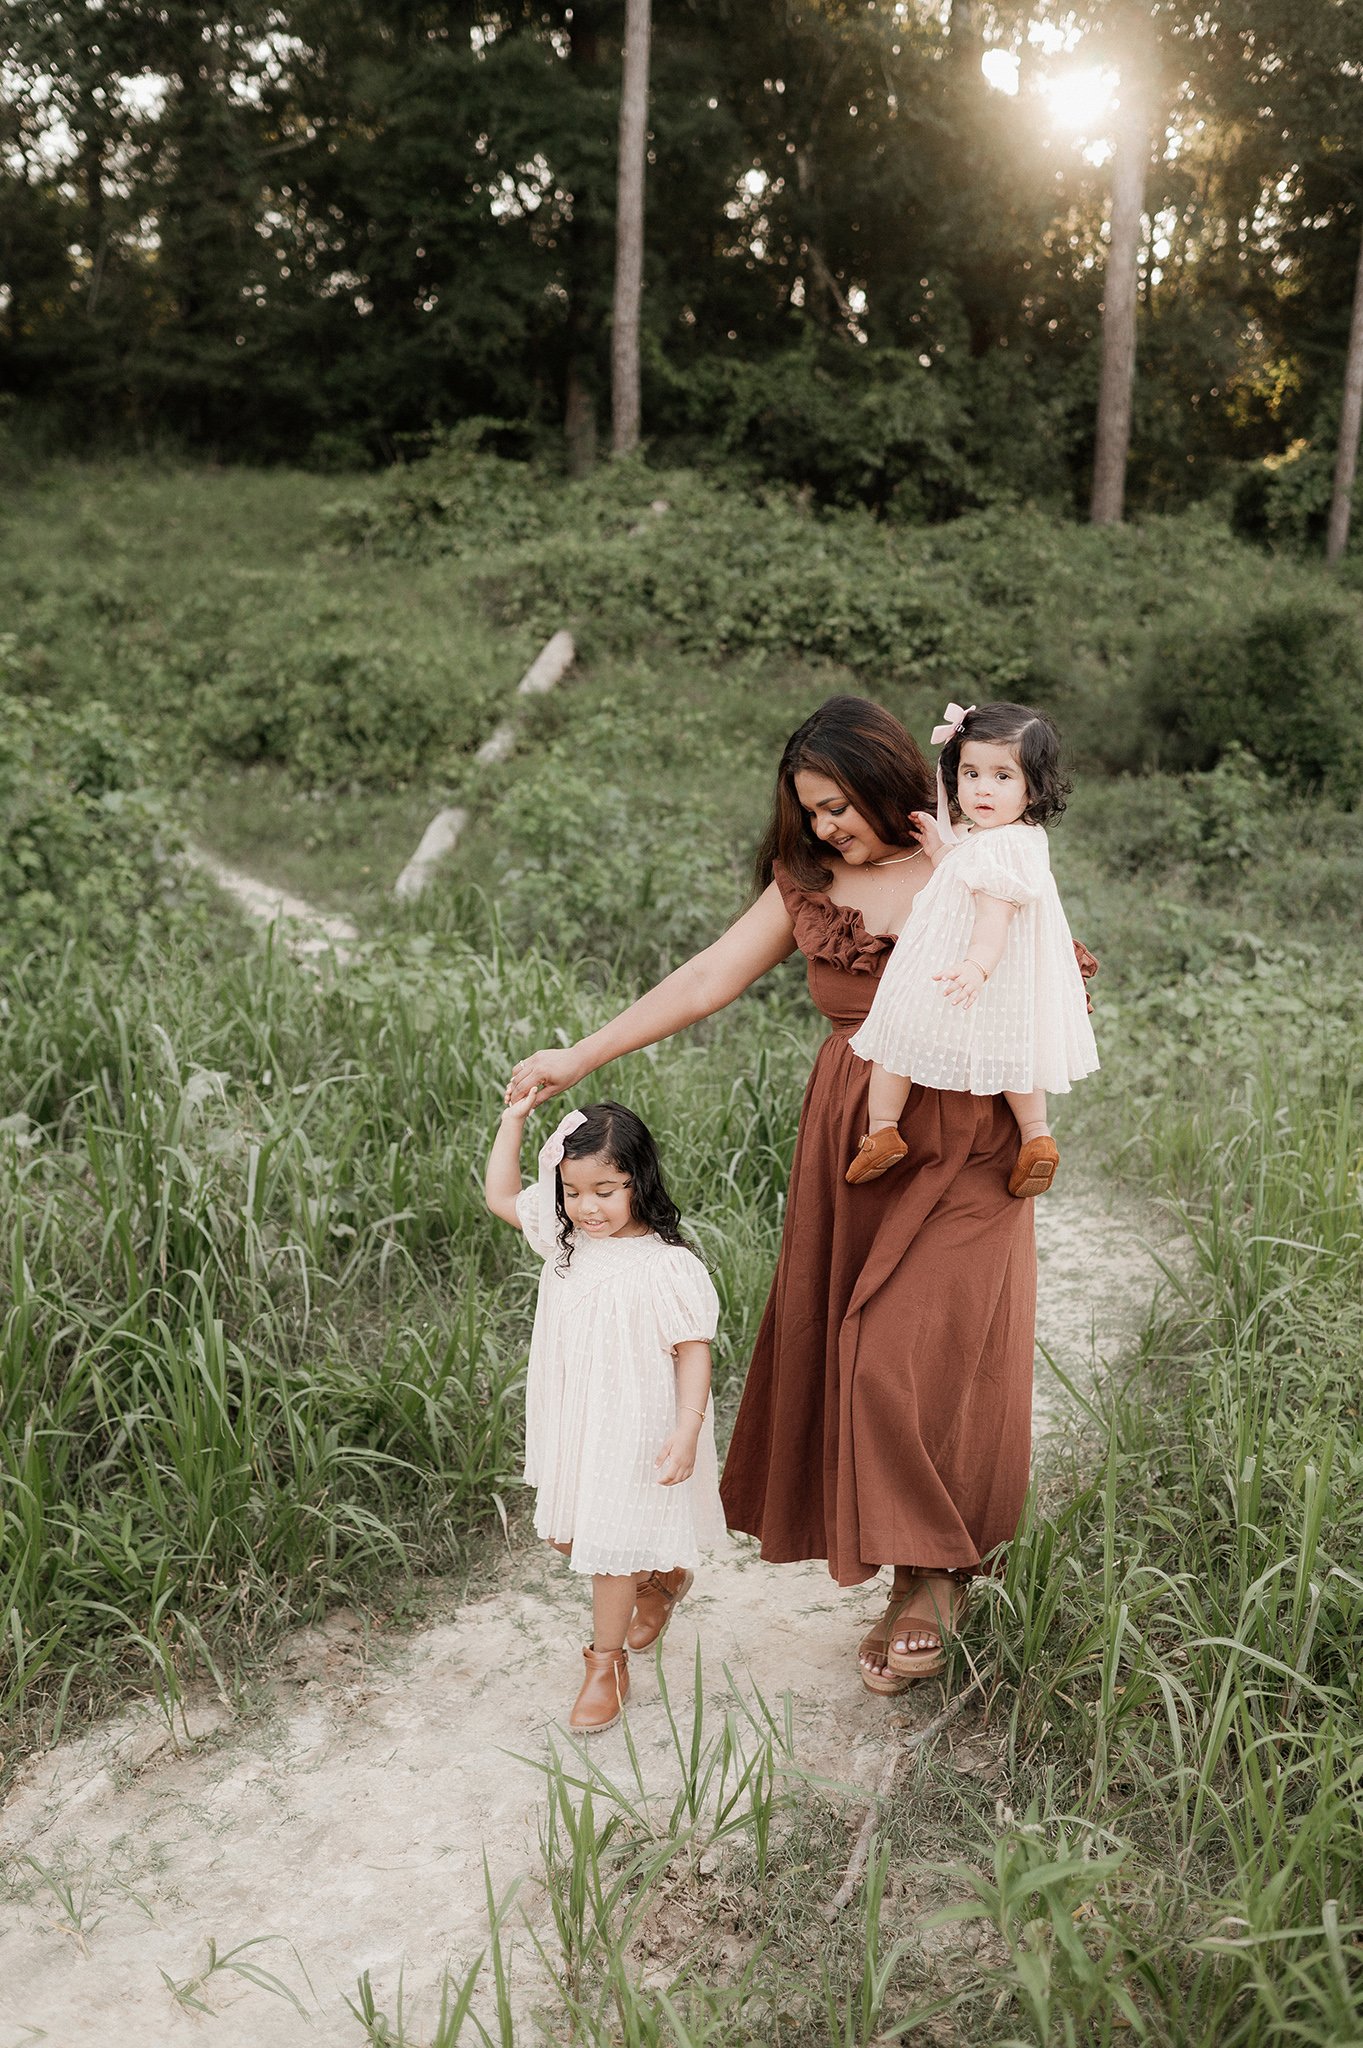 the woodlands family photographer _ conroe photographer _ houston family photographer _ ashley gillen photography _ texas family photographer _ conroe wedding photographer _ conroe texas _ cshi16.jpg